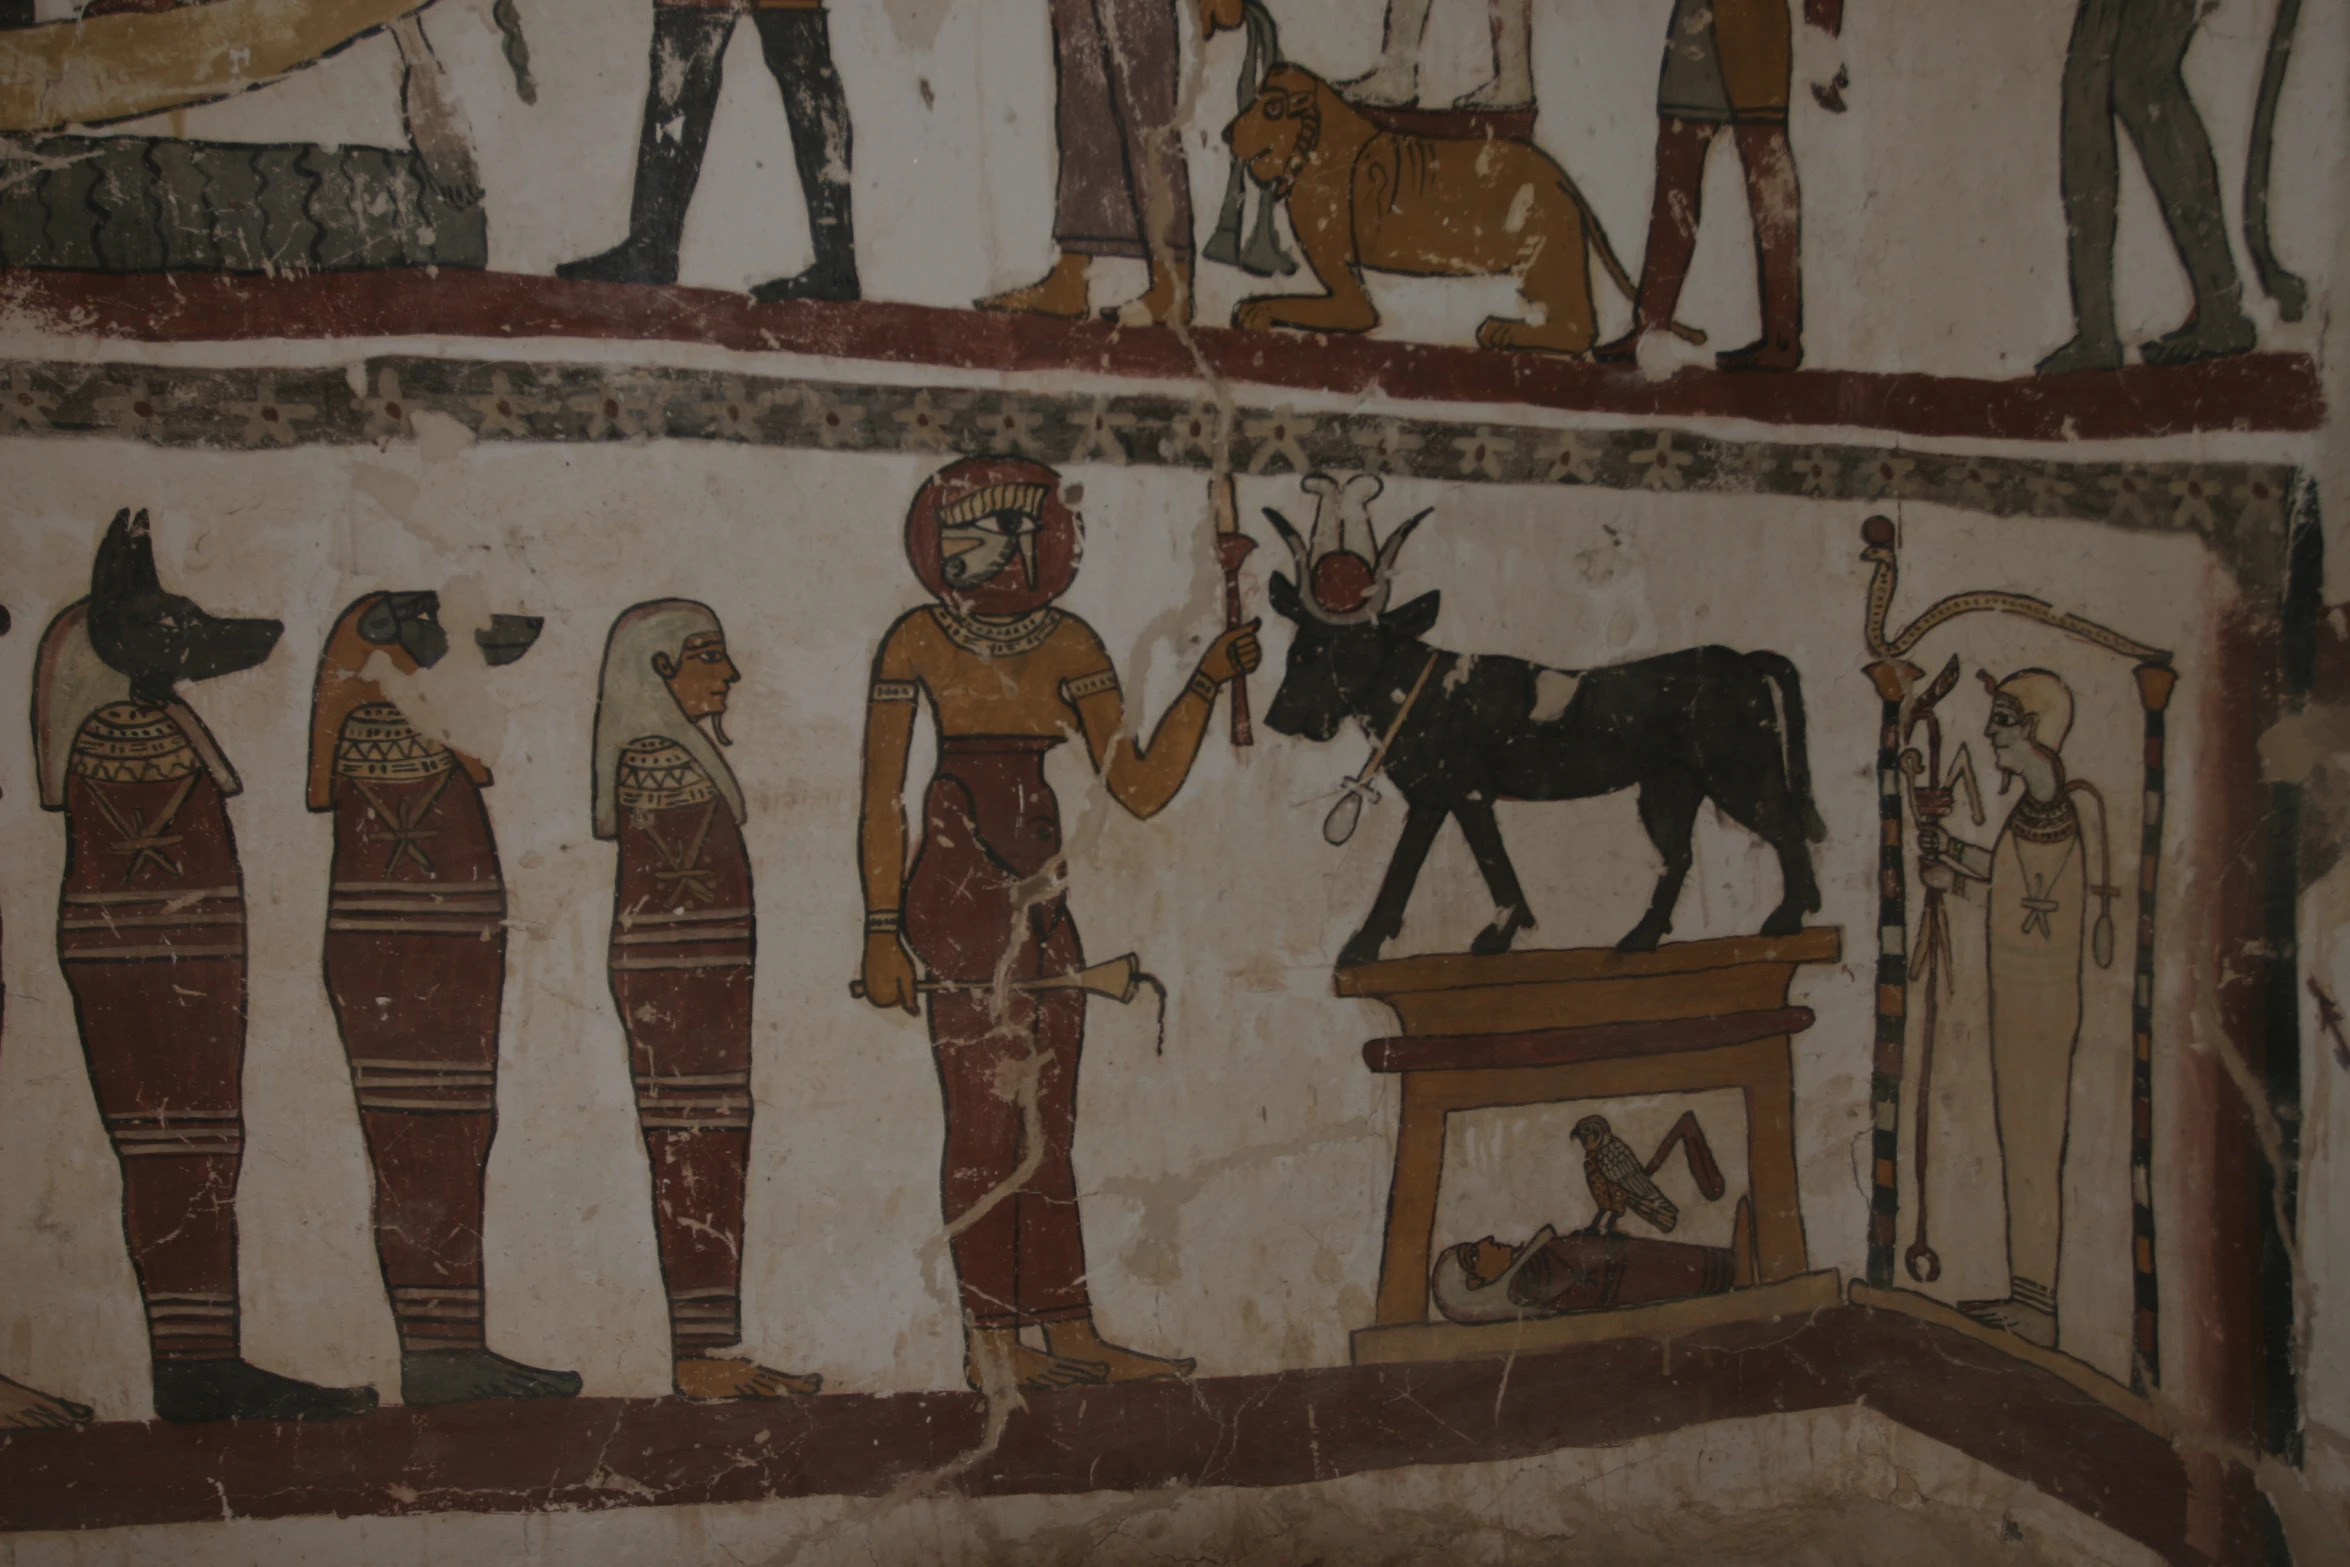 a painting in an ancient style depicts an animal and various ancient people